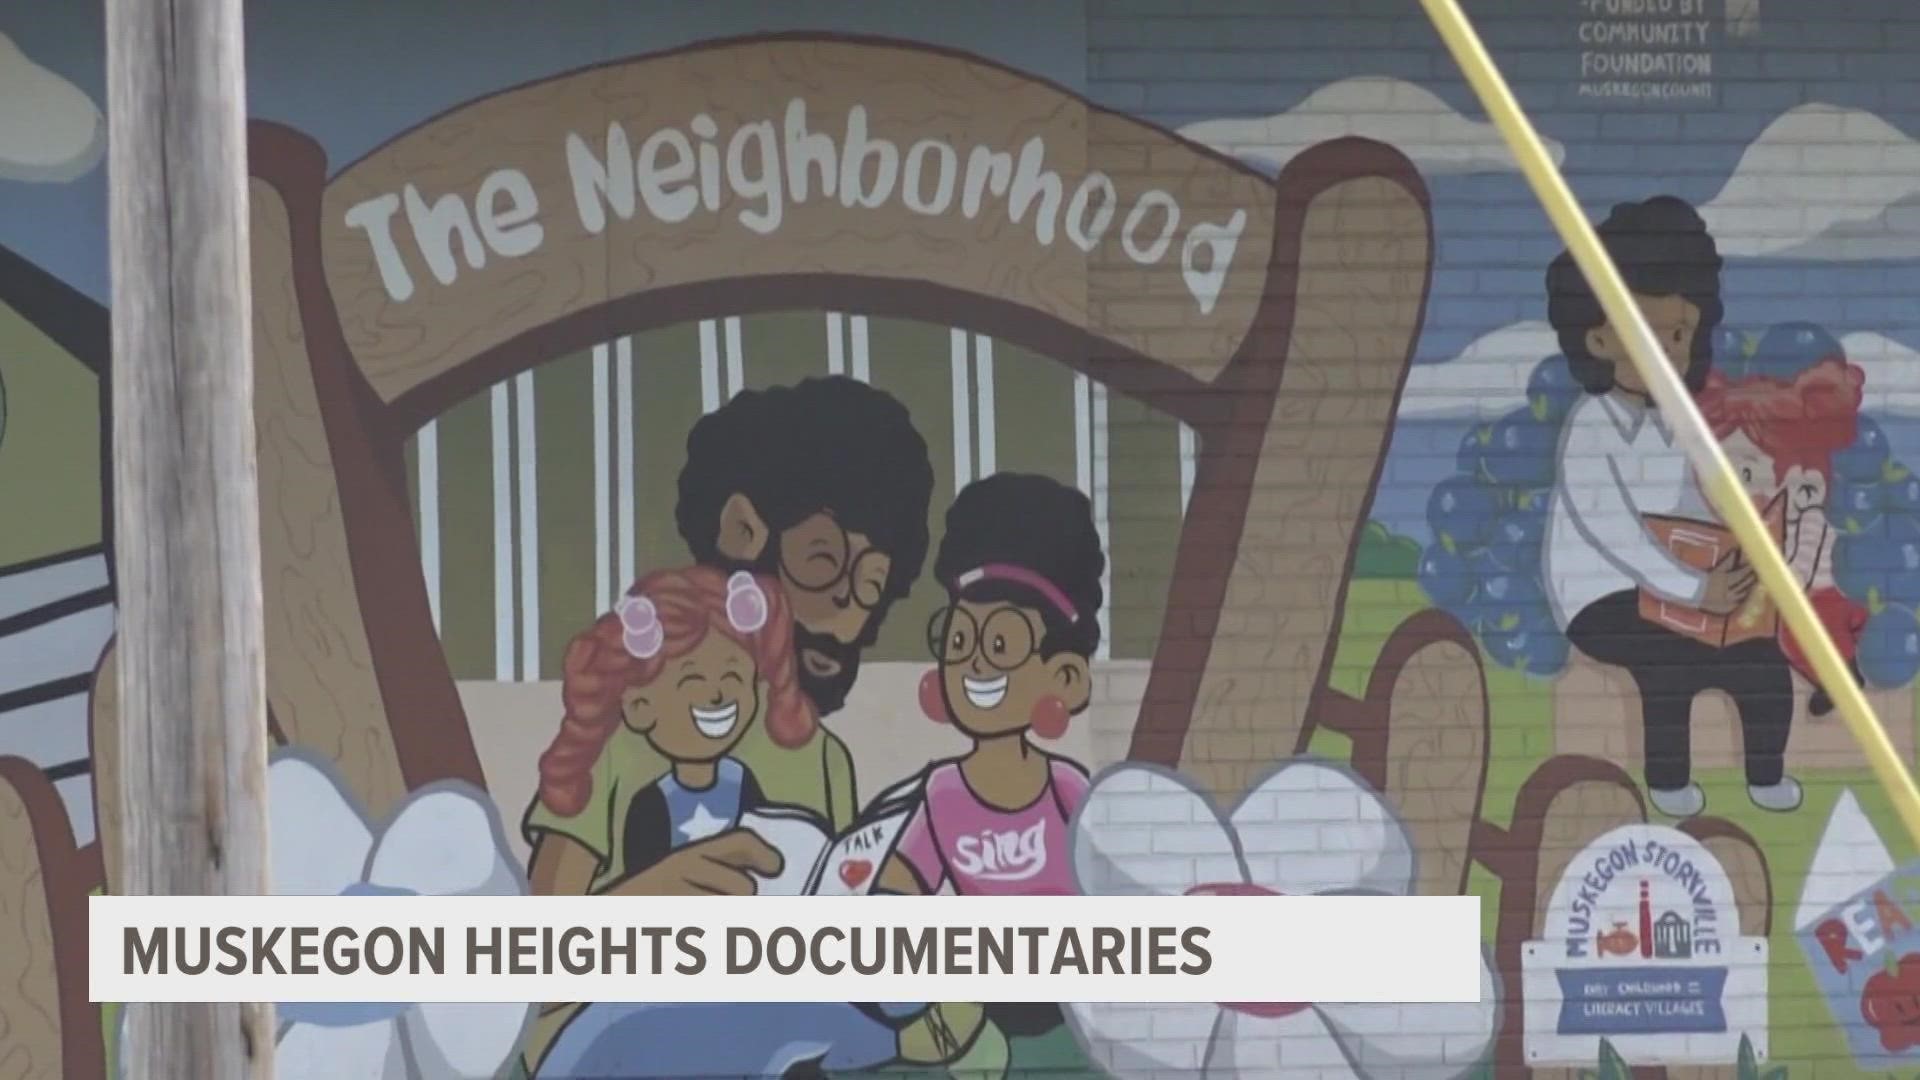 Two separate documentaries have coincidentally been produced to tell the history of Muskegon Heights in different ways.